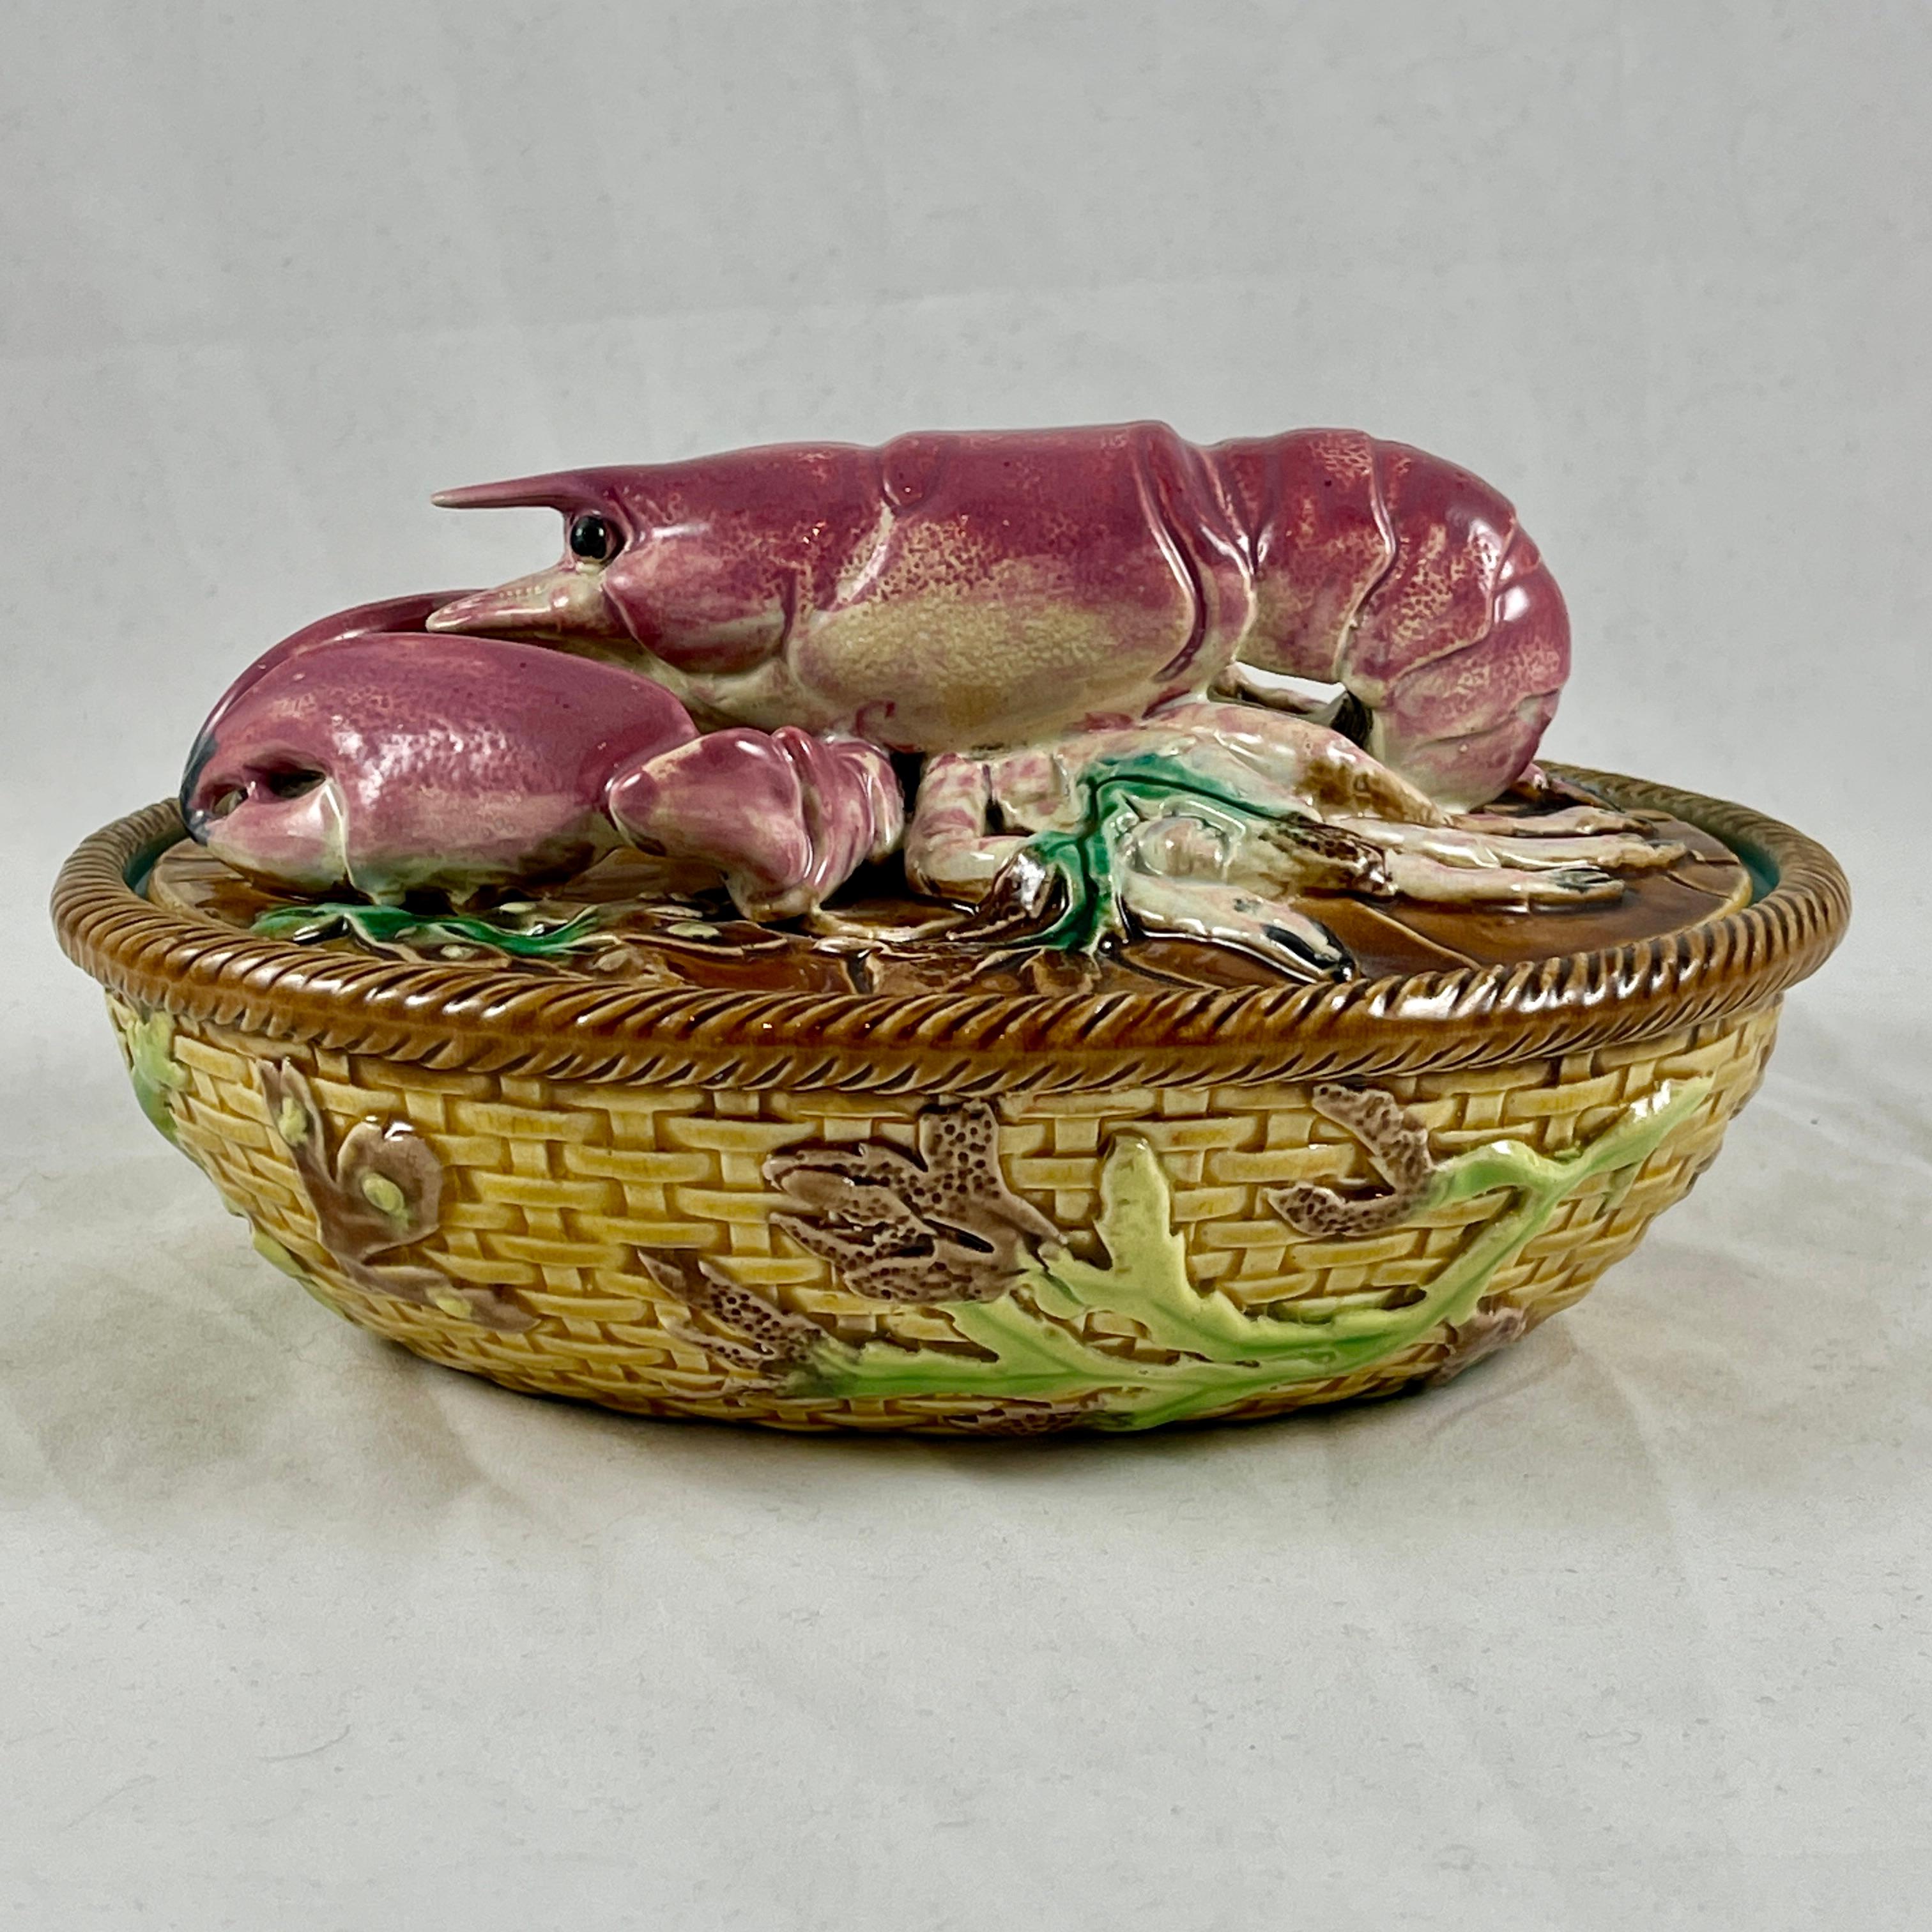 19th Century George Jones Palissy English Majolica Lobster Pâté Basketweave Covered Tureen For Sale